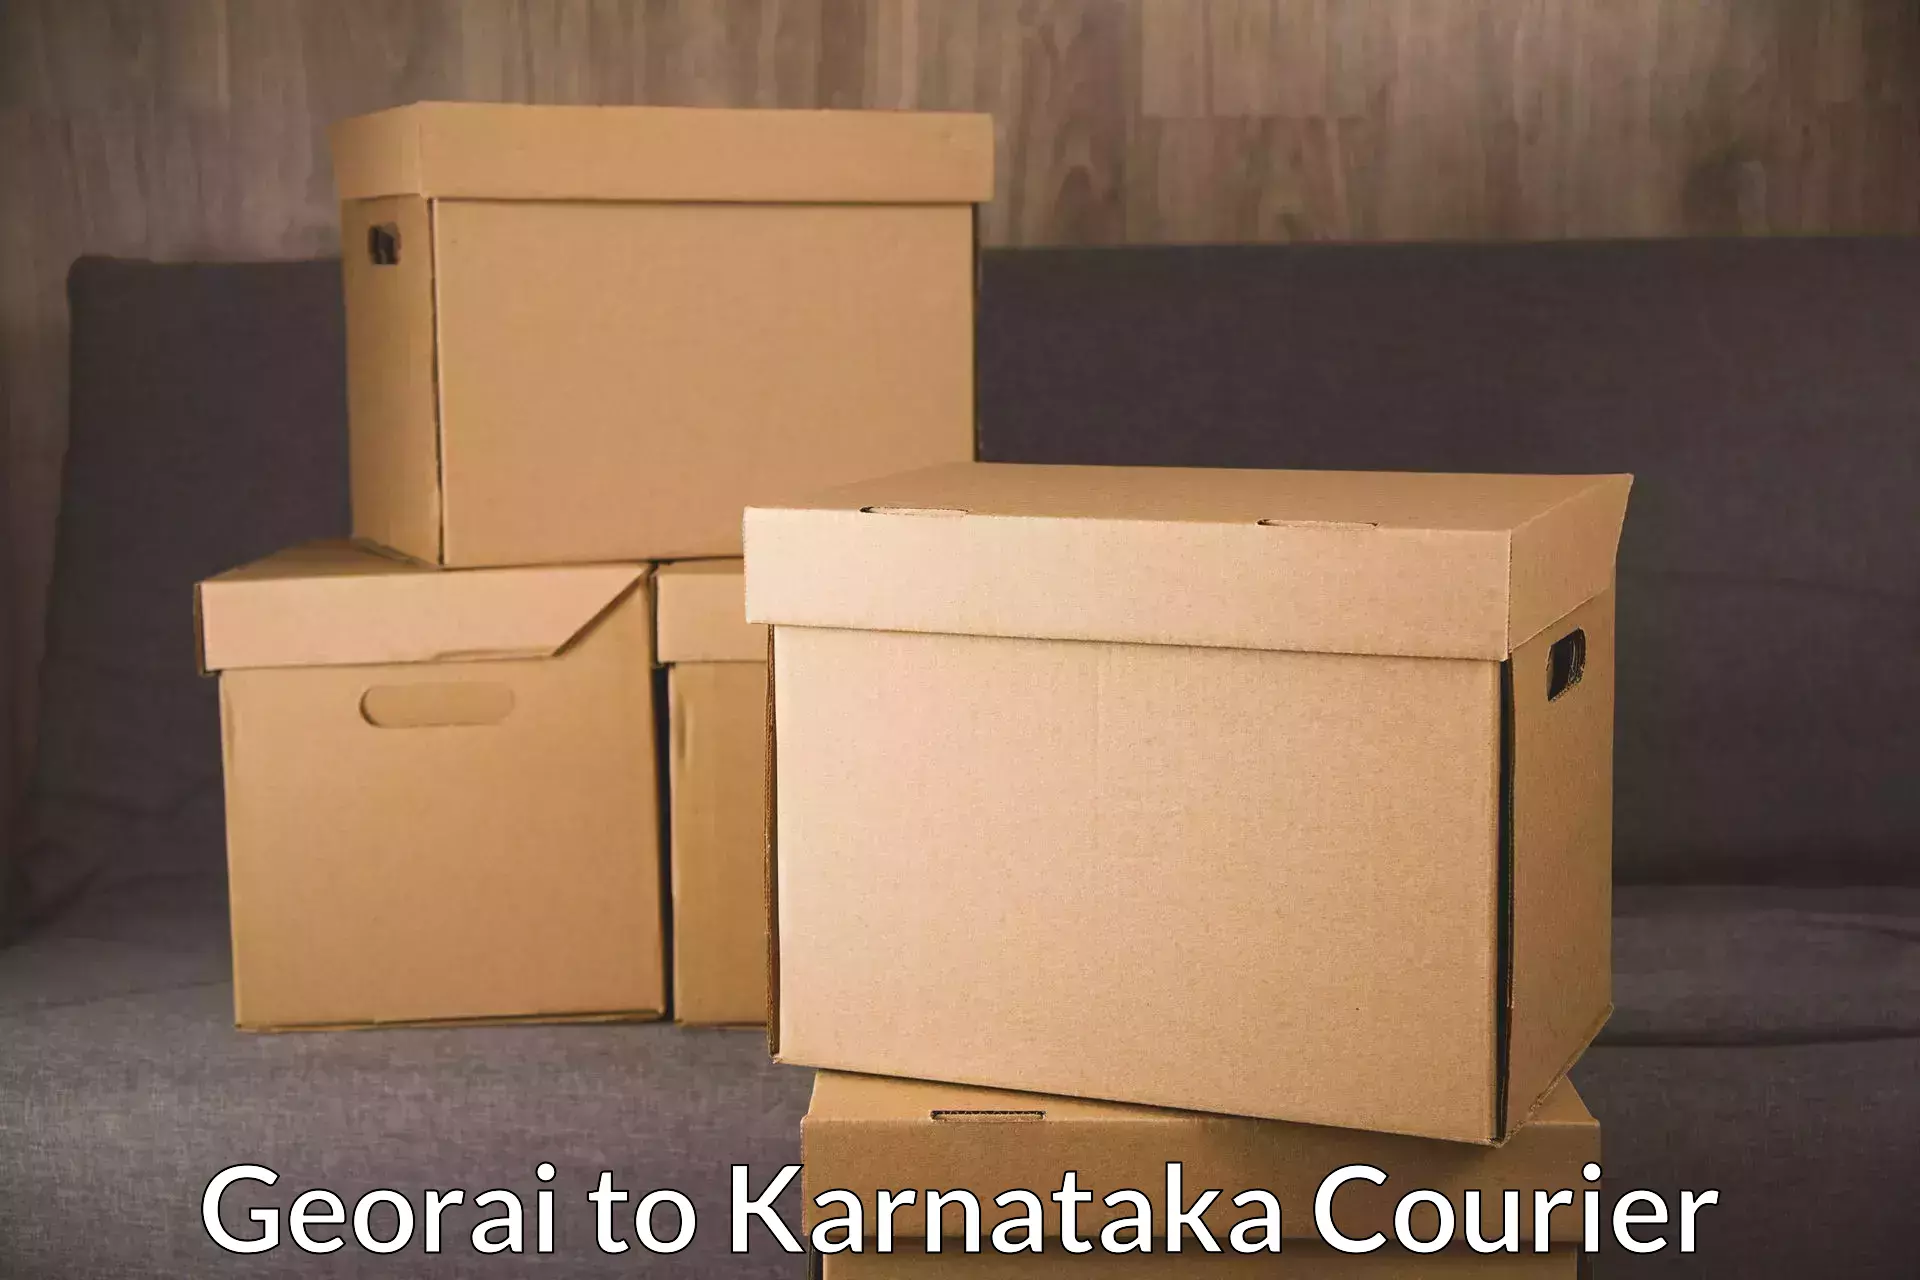 Cash on delivery service in Georai to Karnataka